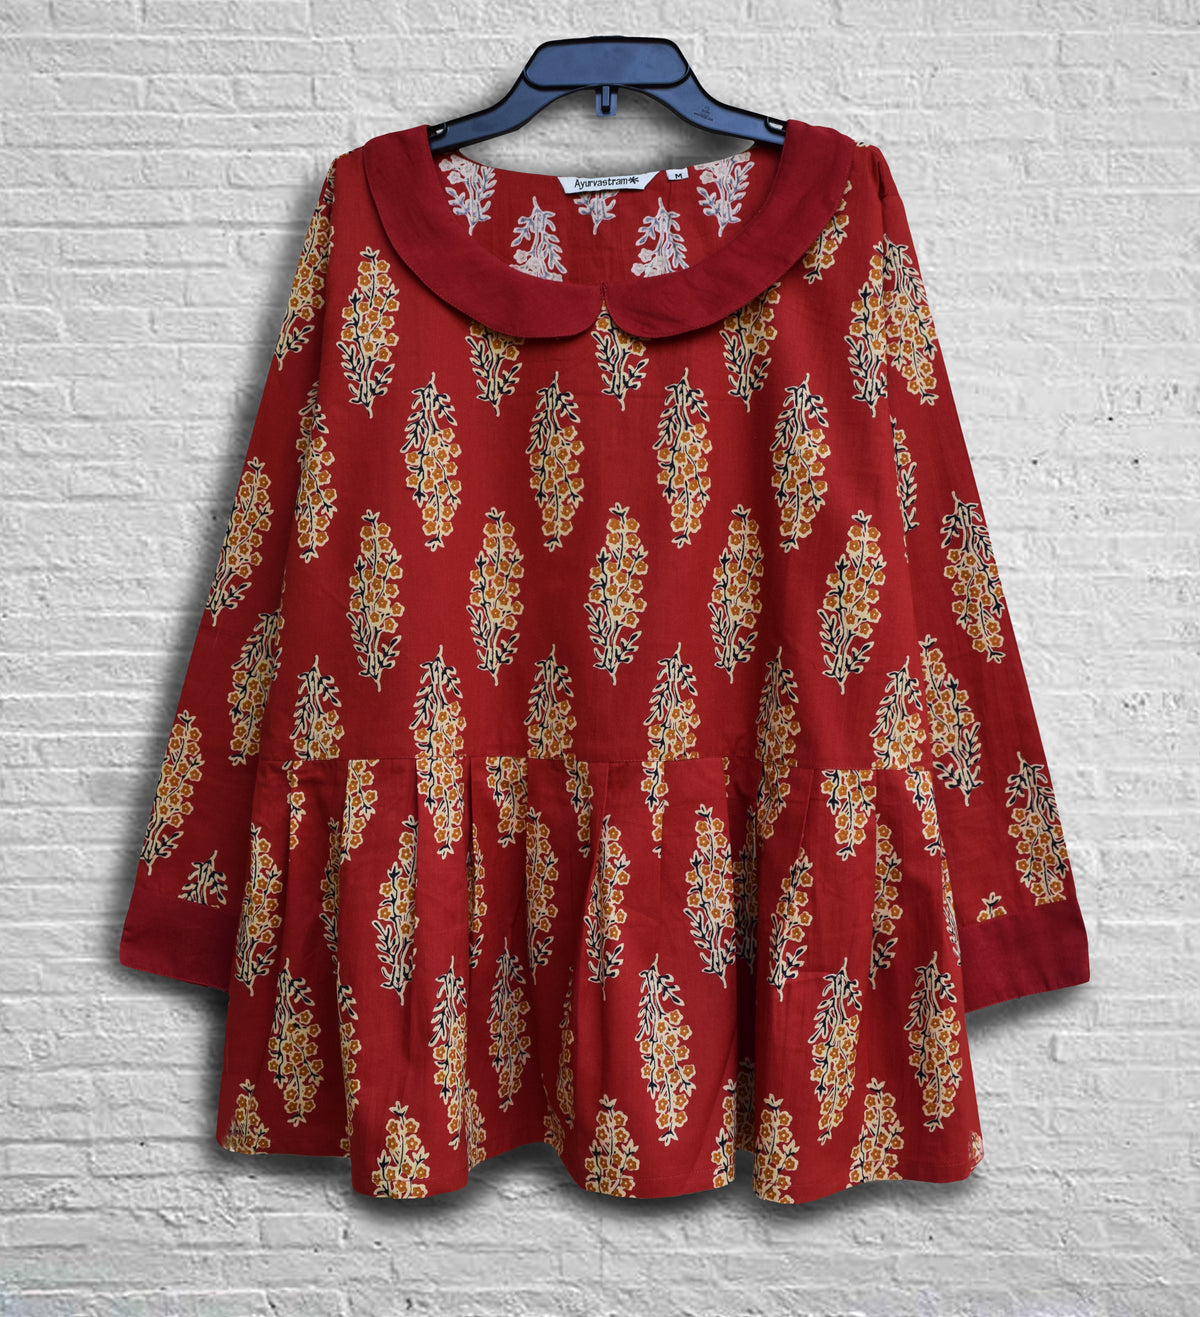 AVNI Printed Soft Cotton Hand Embroidered Peplum Top: Made to Order/Customizable